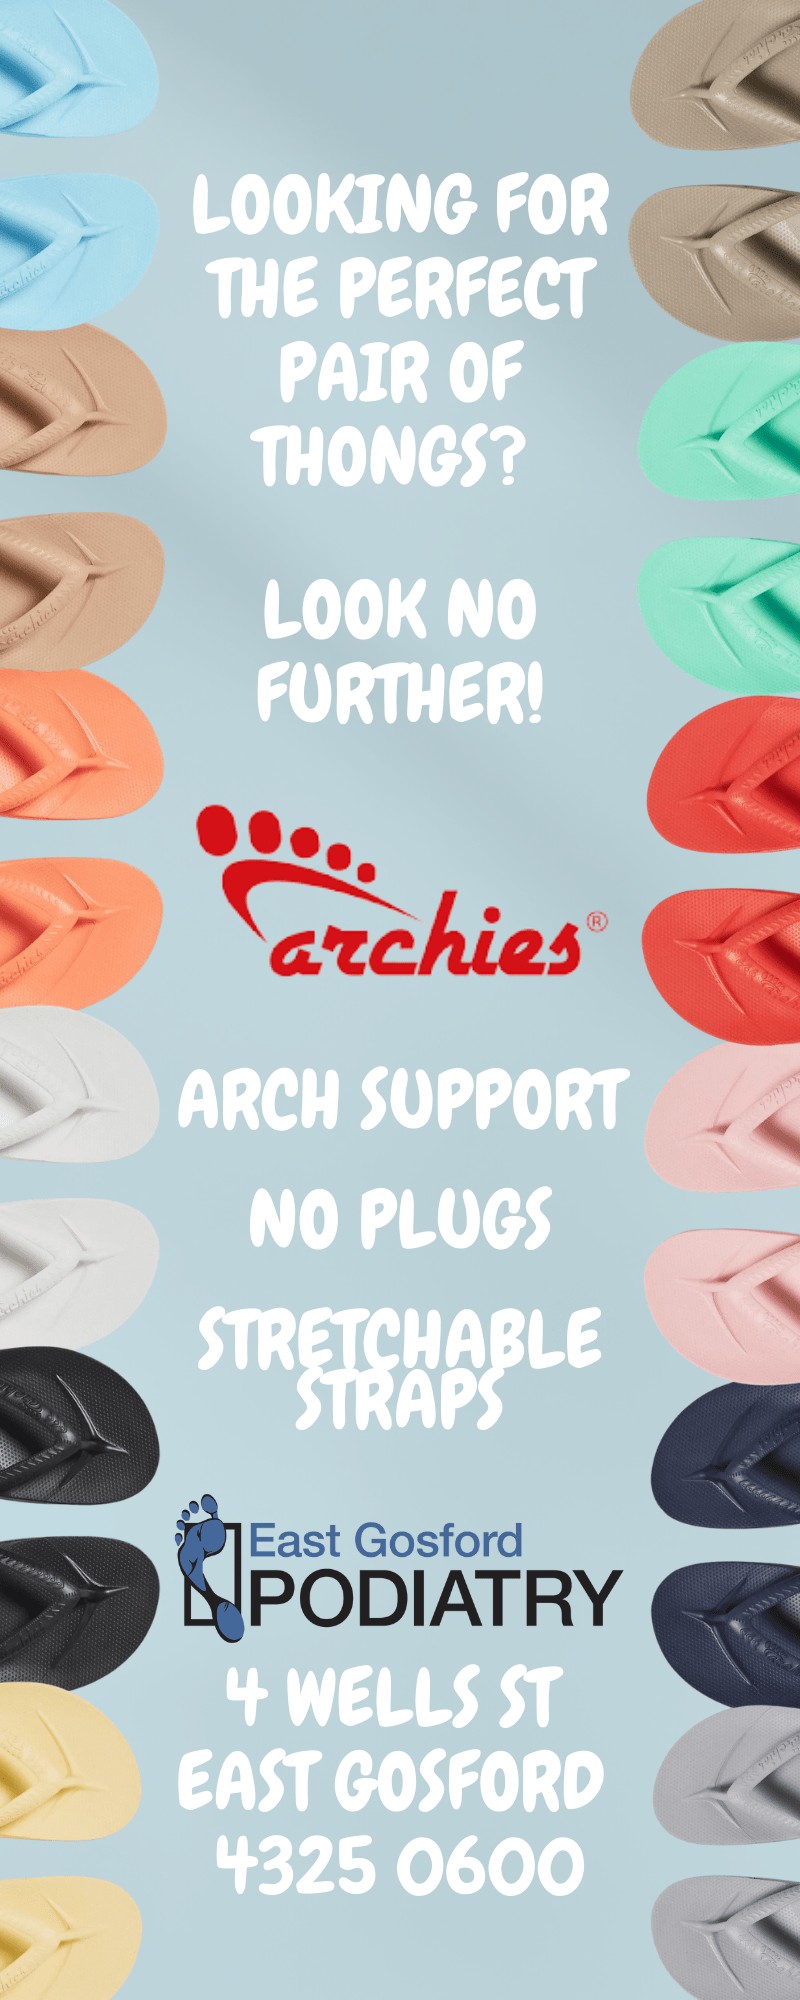 OFFICIAL Archies Thongs Stockist